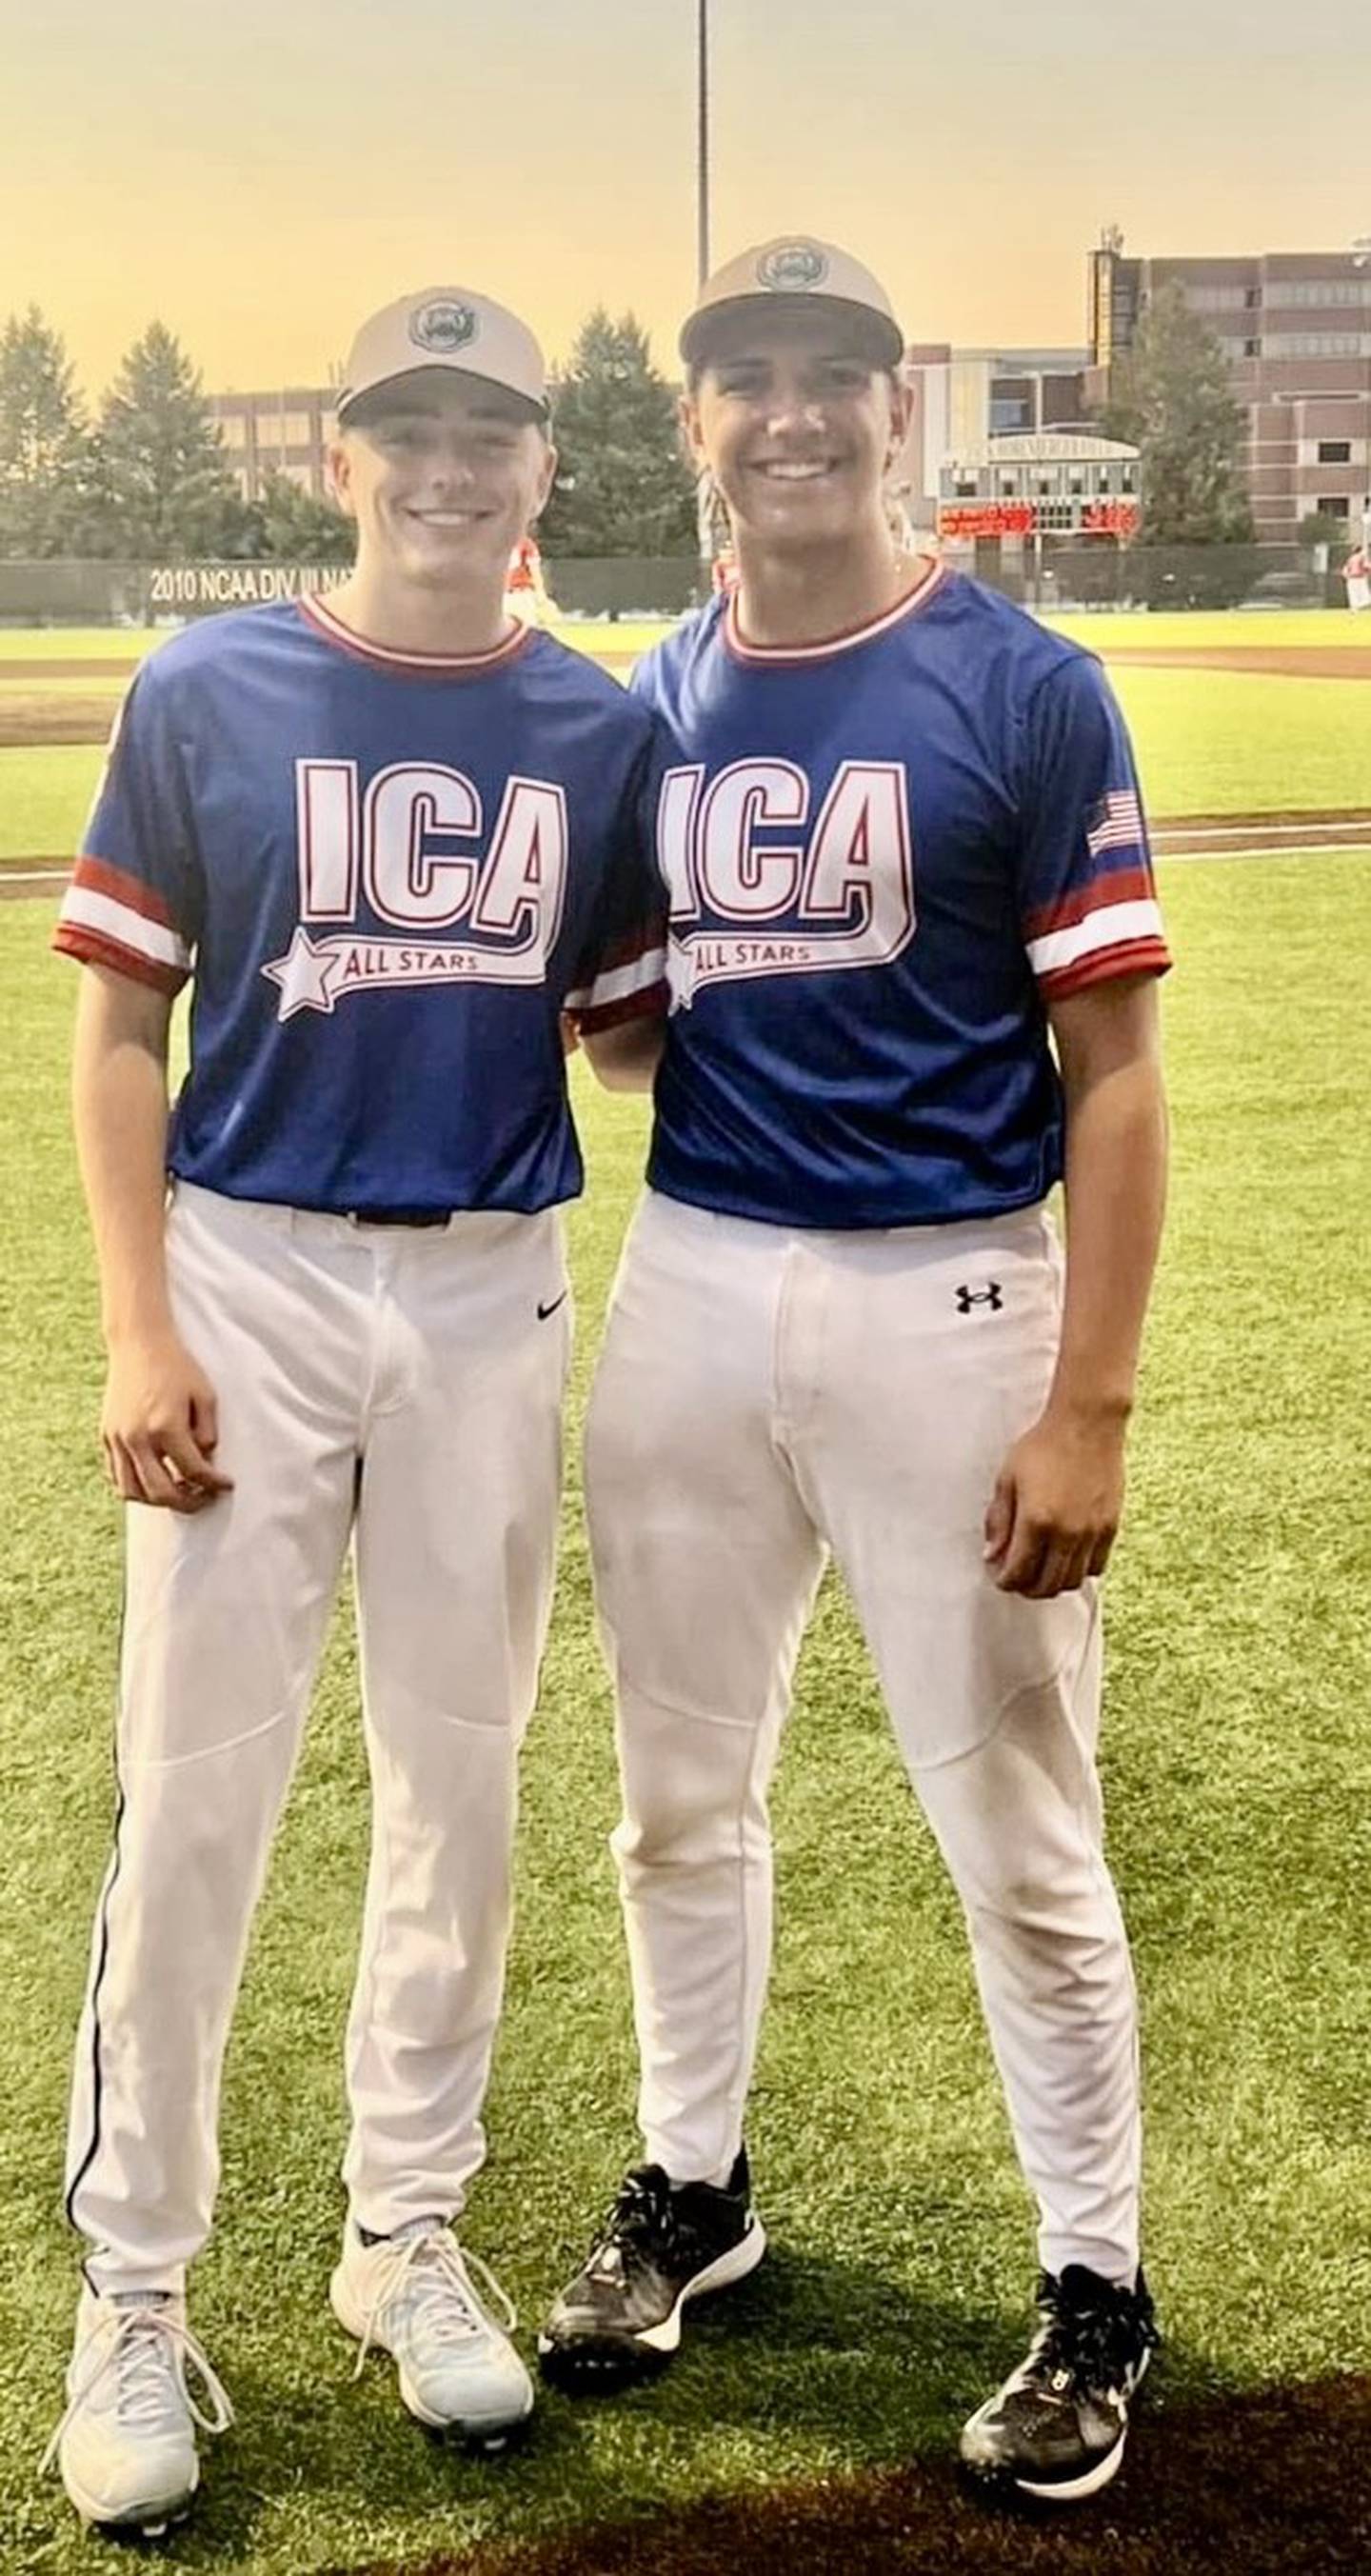 St. Bede's Nathan Husser and Alex Ankiewicz were reunited on the Blue team for Wednesday's The players line up for Wednesday's ICA All-Star Game in Bloomington.